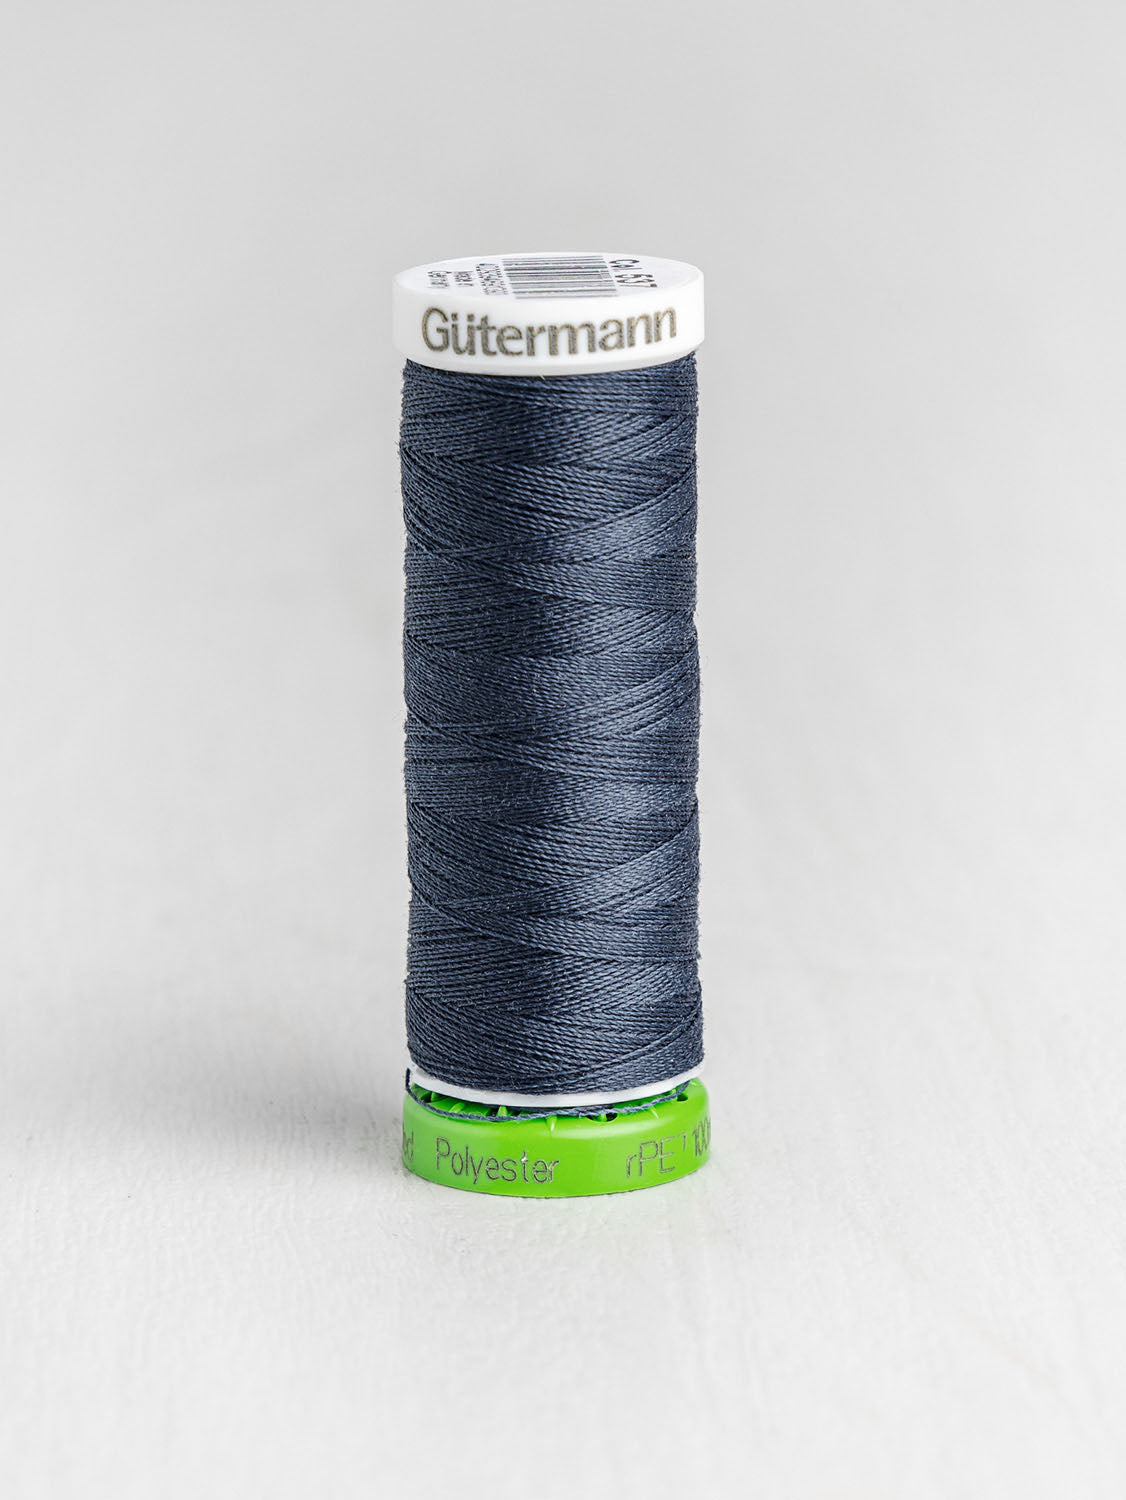 Gütermann All Purpose rPET Recycled Thread - Stormy Sea 537 | Core Fabrics